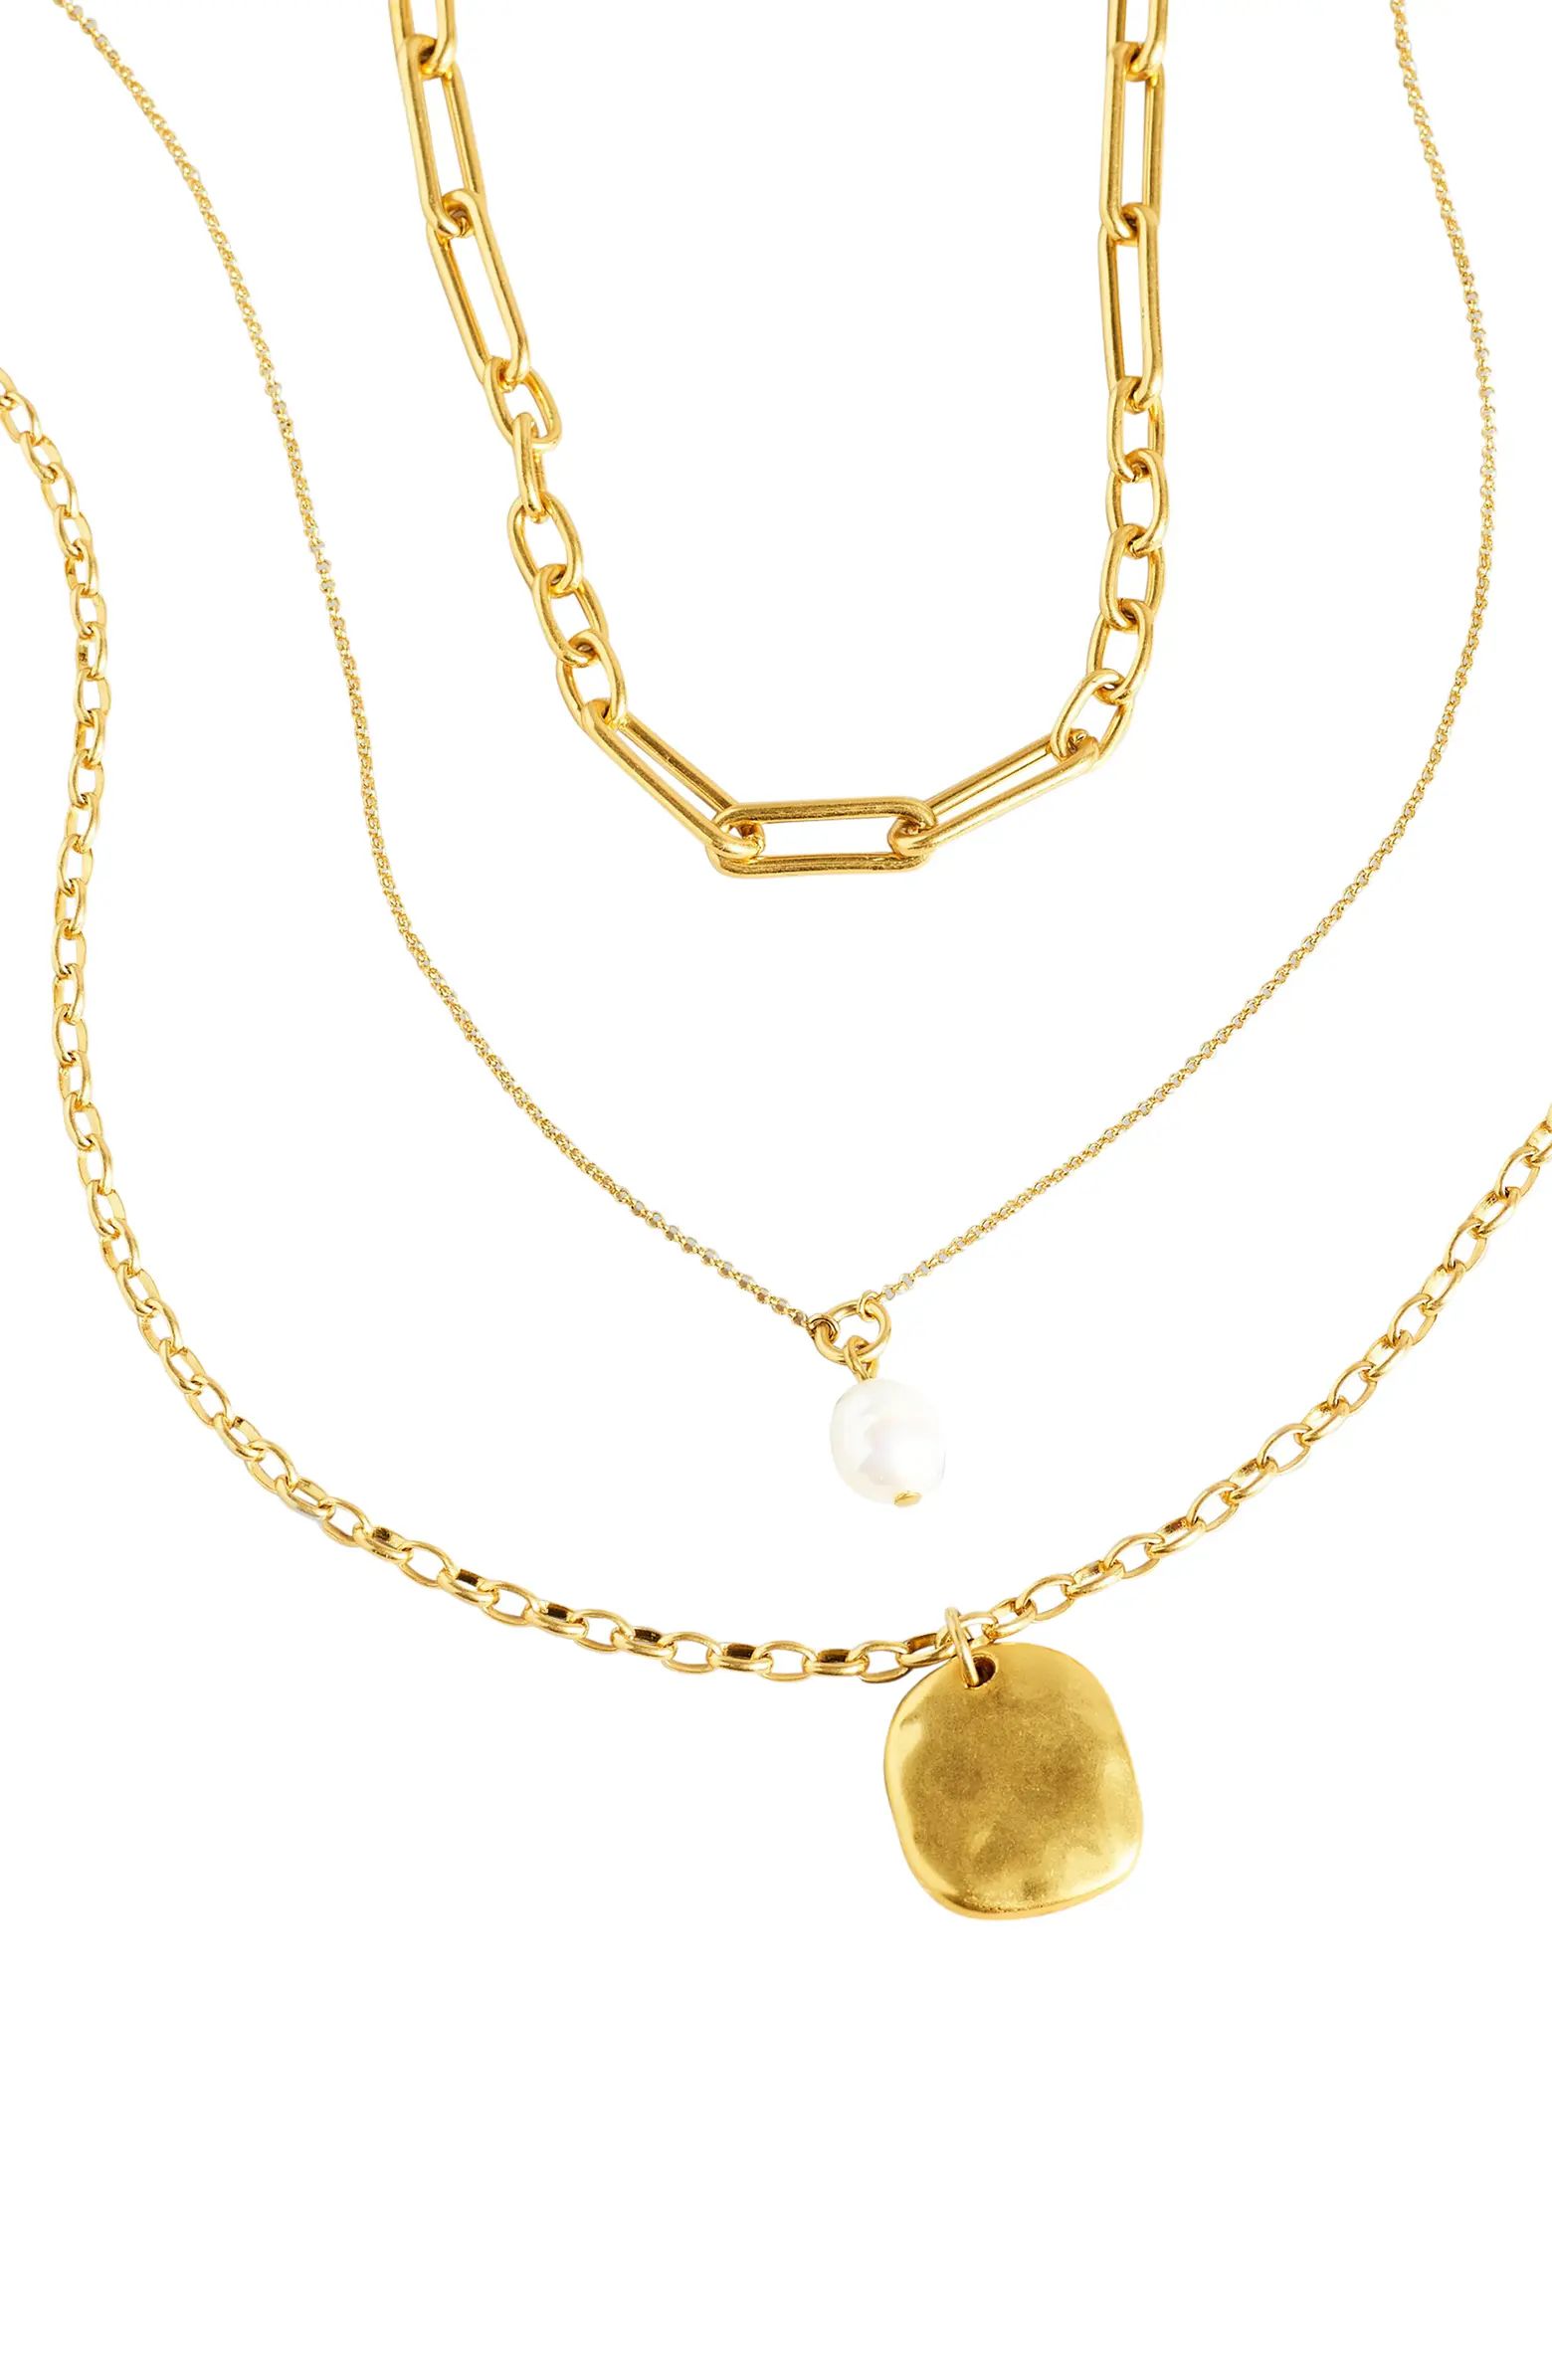 Set of 3 Chain Link Necklaces | Nordstrom